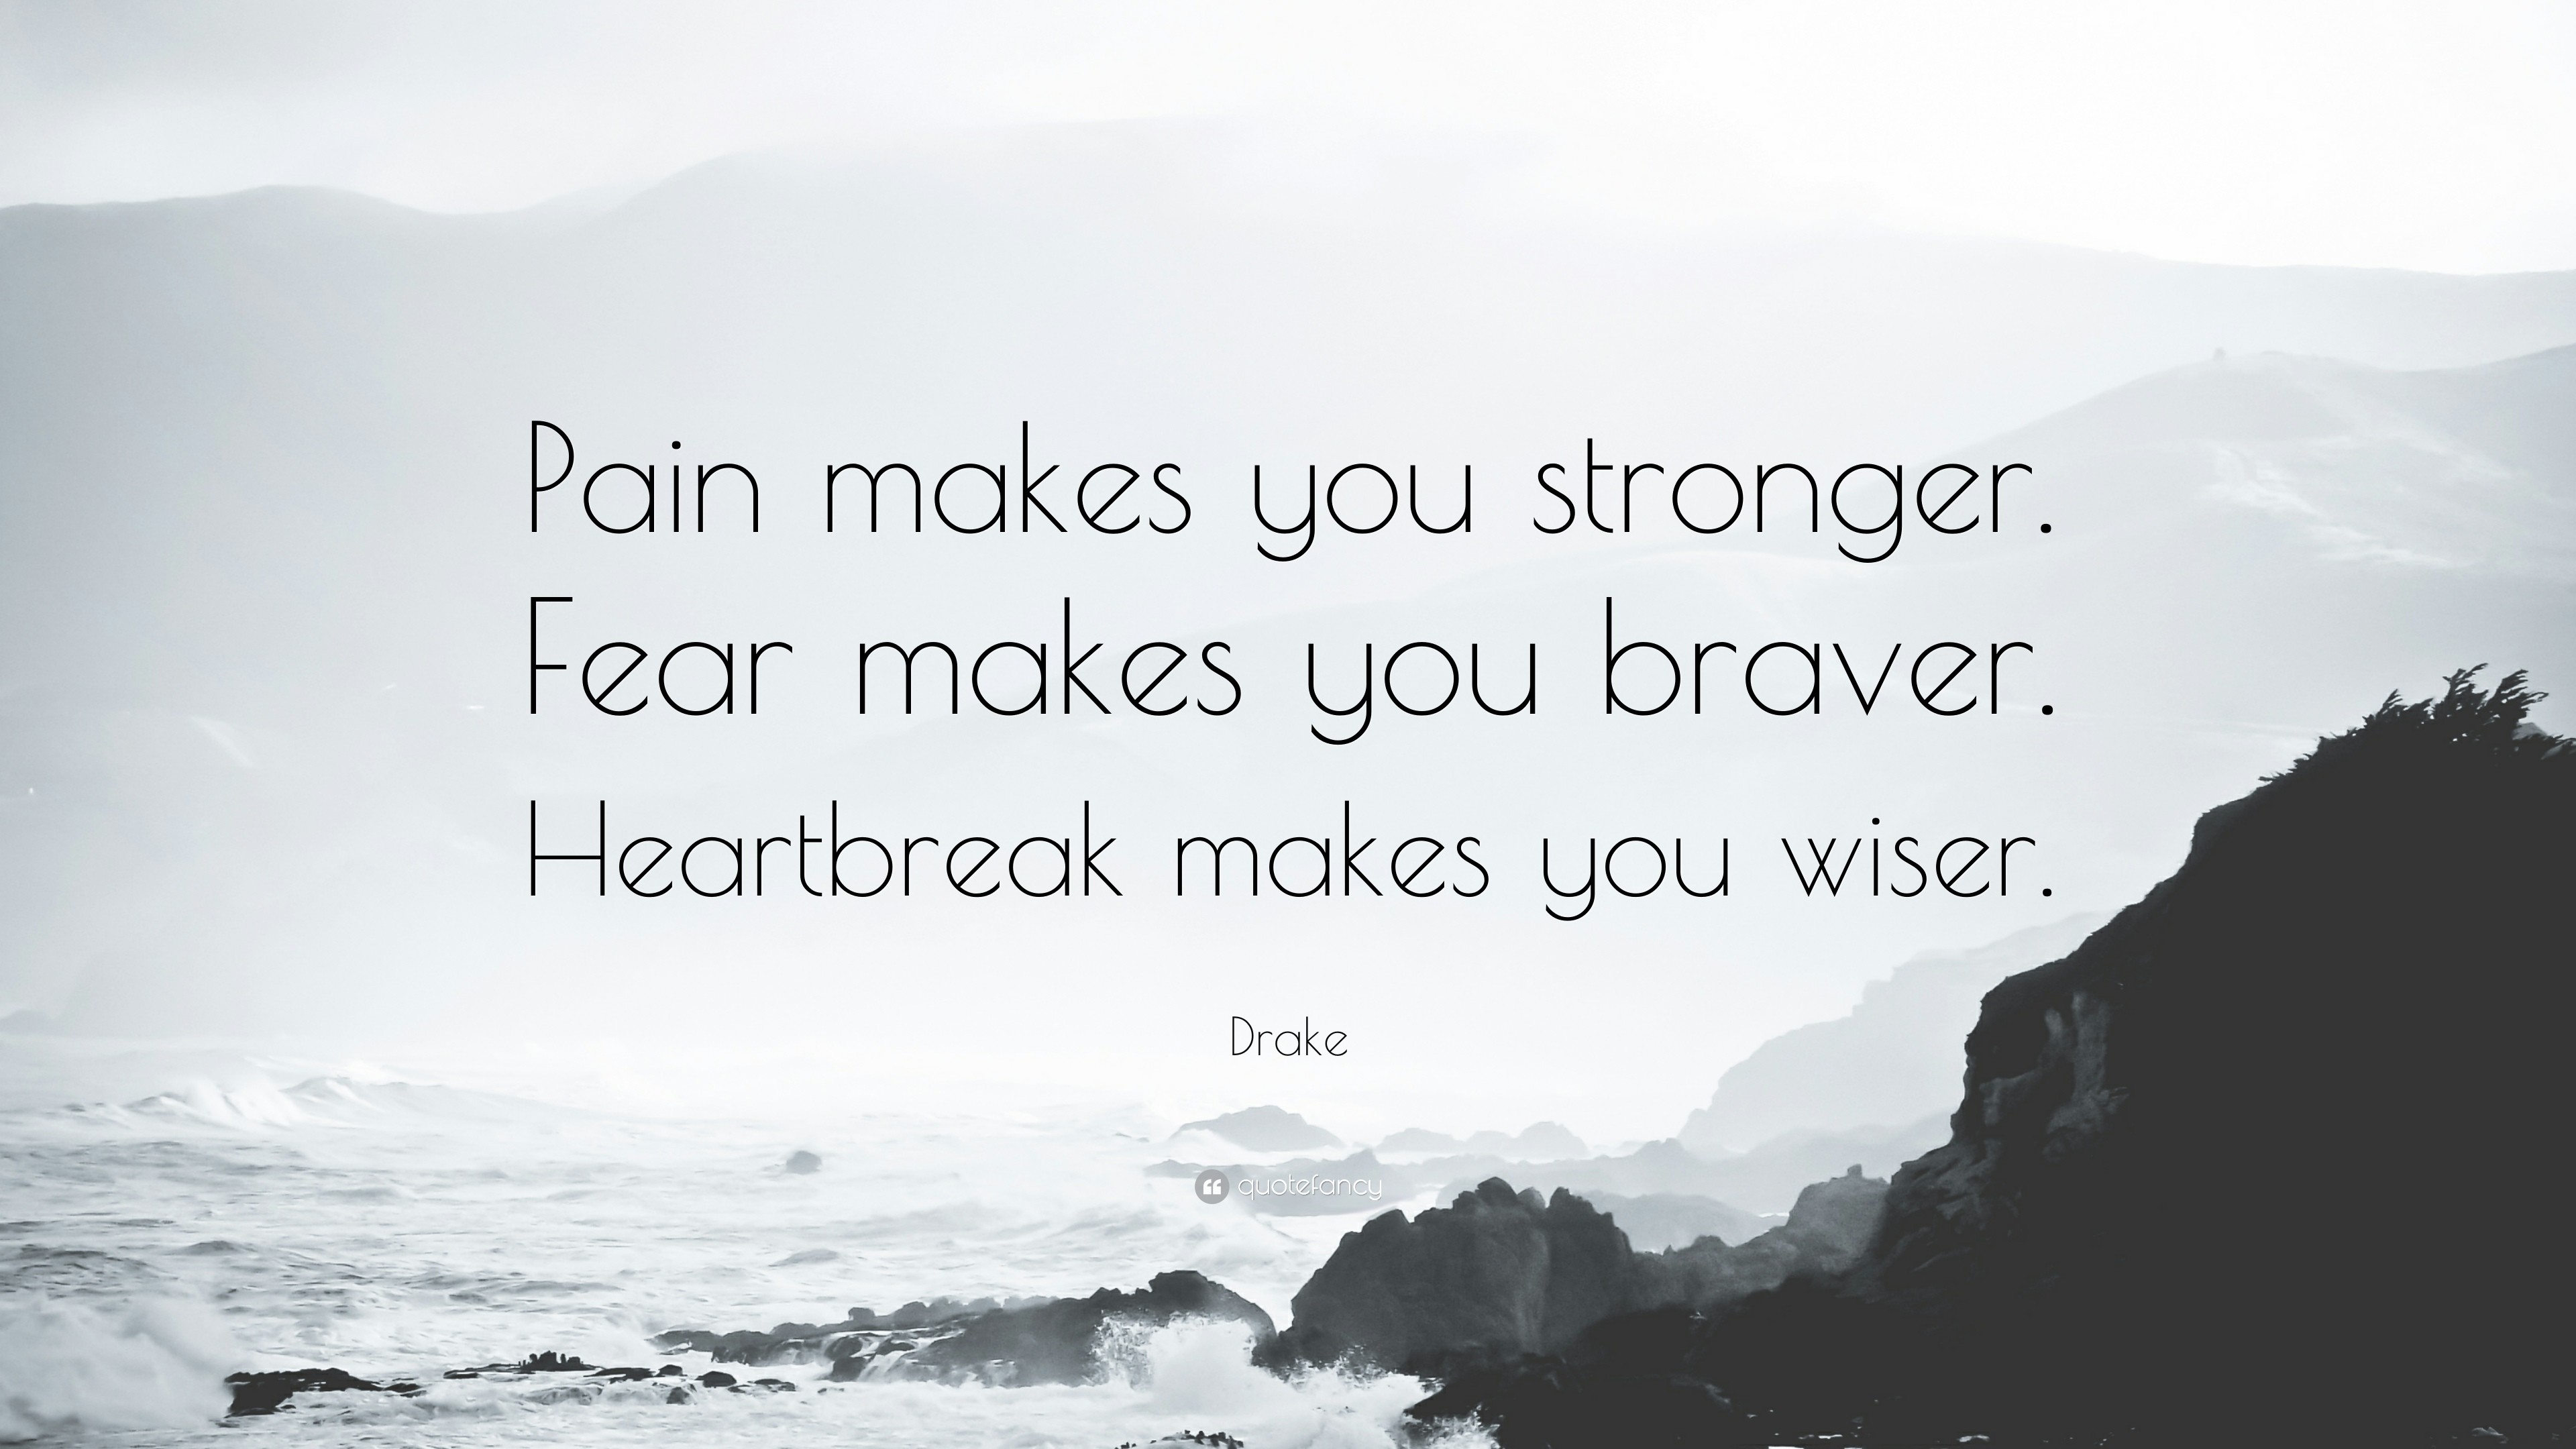 3840x2160 17 wallpapers. Drake Quote: “Pain makes you stronger. Fear makes you  braver. Heartbreak makes